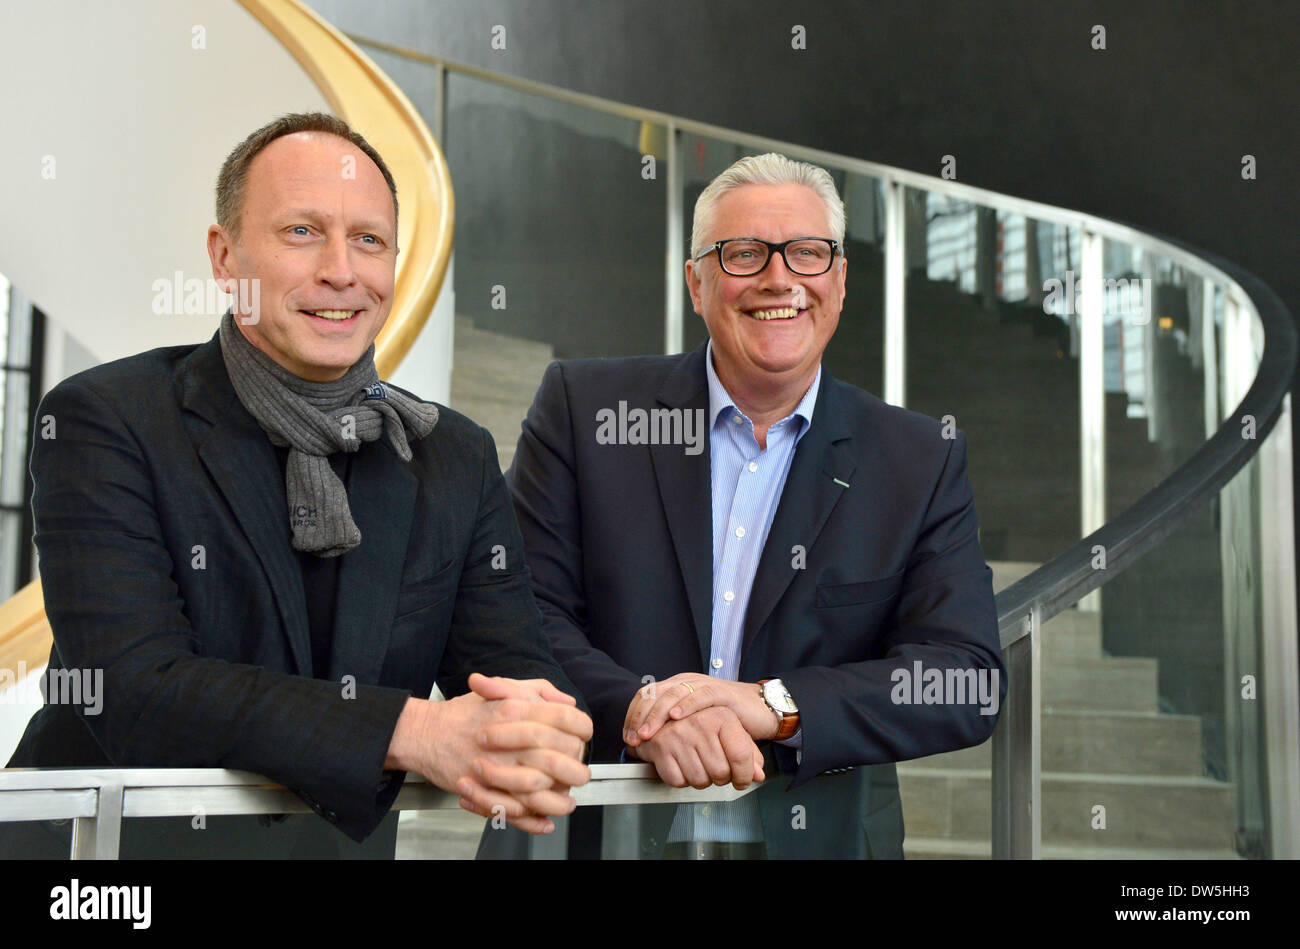 Erfurt, Germany. 28th Feb, 2014. Hasko Weber (L-R), director of the German National Theater Weiman and Swiss Director of Theater Erfurt Guy Montavon stand next to each other in Erfurt, Germany, 28 February 2014. They discuss future collaborations between Theater Erfurt and the German National Theater Weimar during a press confernce. Photo: MARTIN SCHUTT/dpa/Alamy Live News Stock Photo